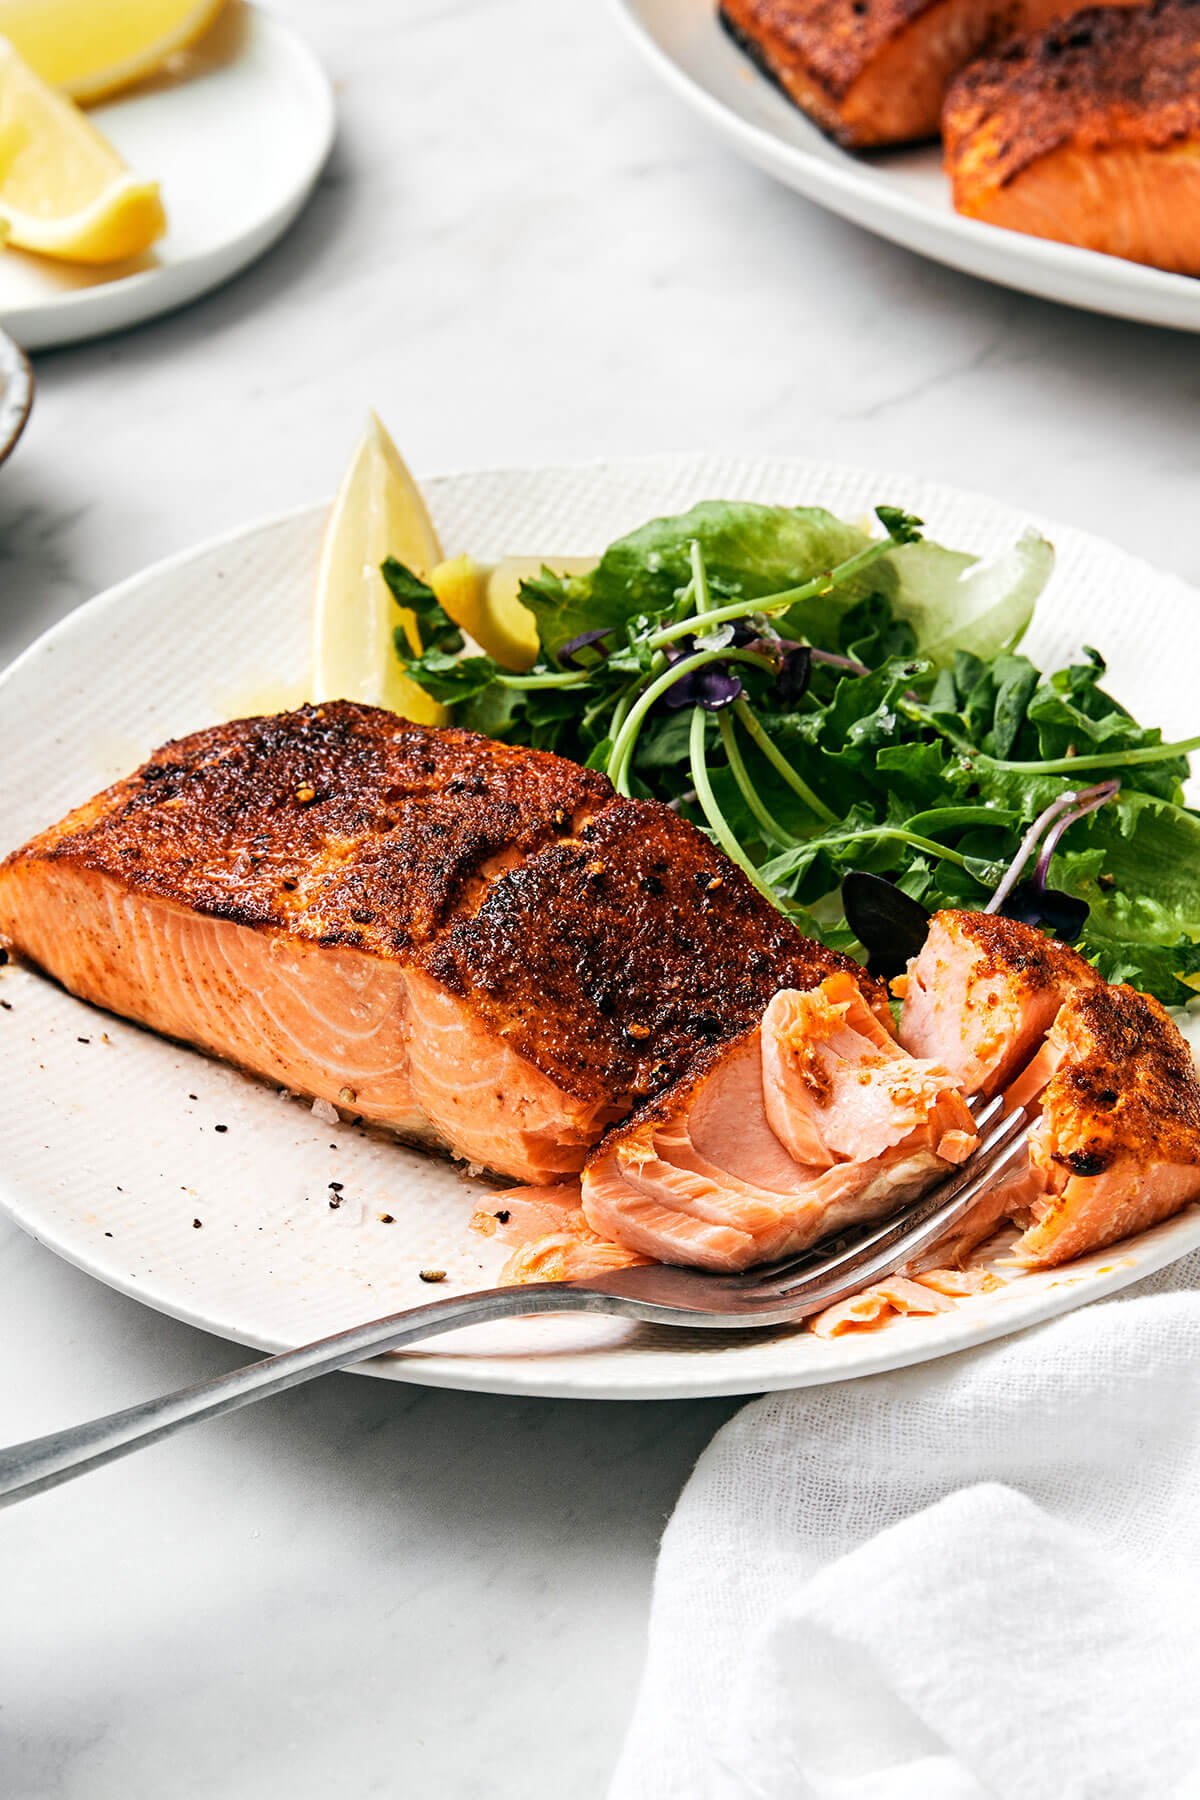 Seasoning for Salmon: Enhancing Flavor Profiles of Fish Dishes